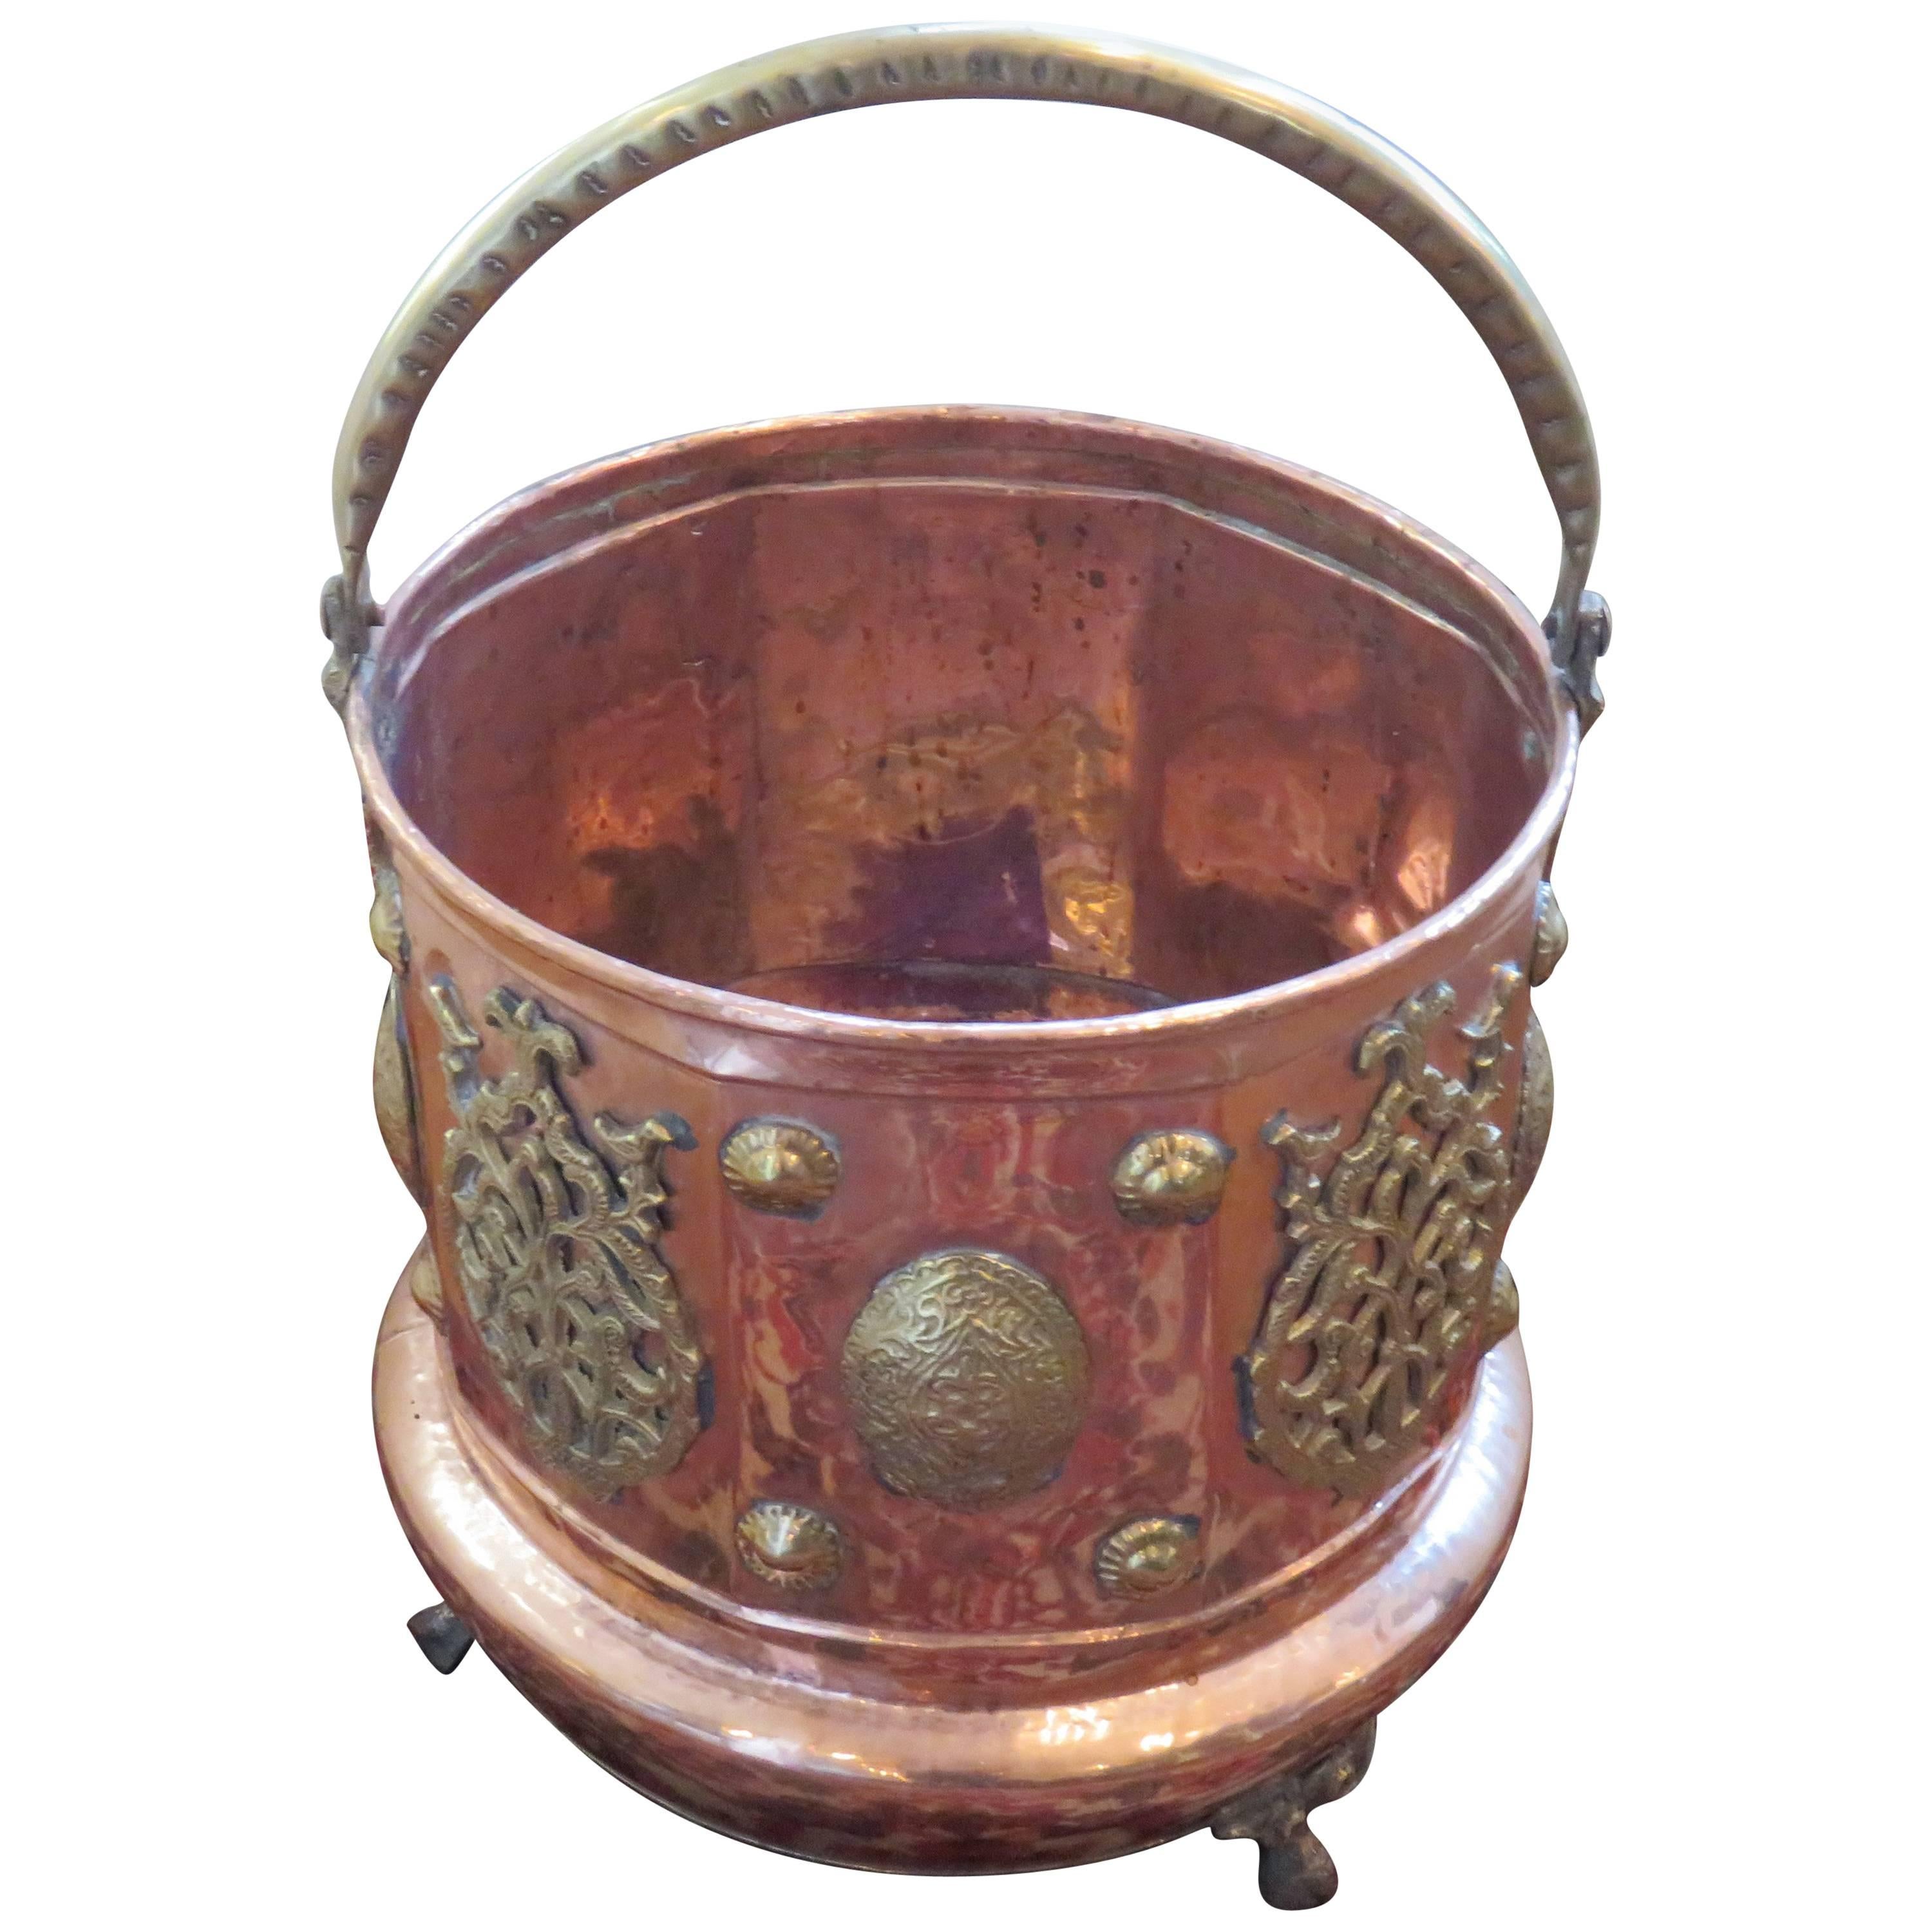 19th Century Hand-Hammered Copper and Brass Coal Bucket or Planter